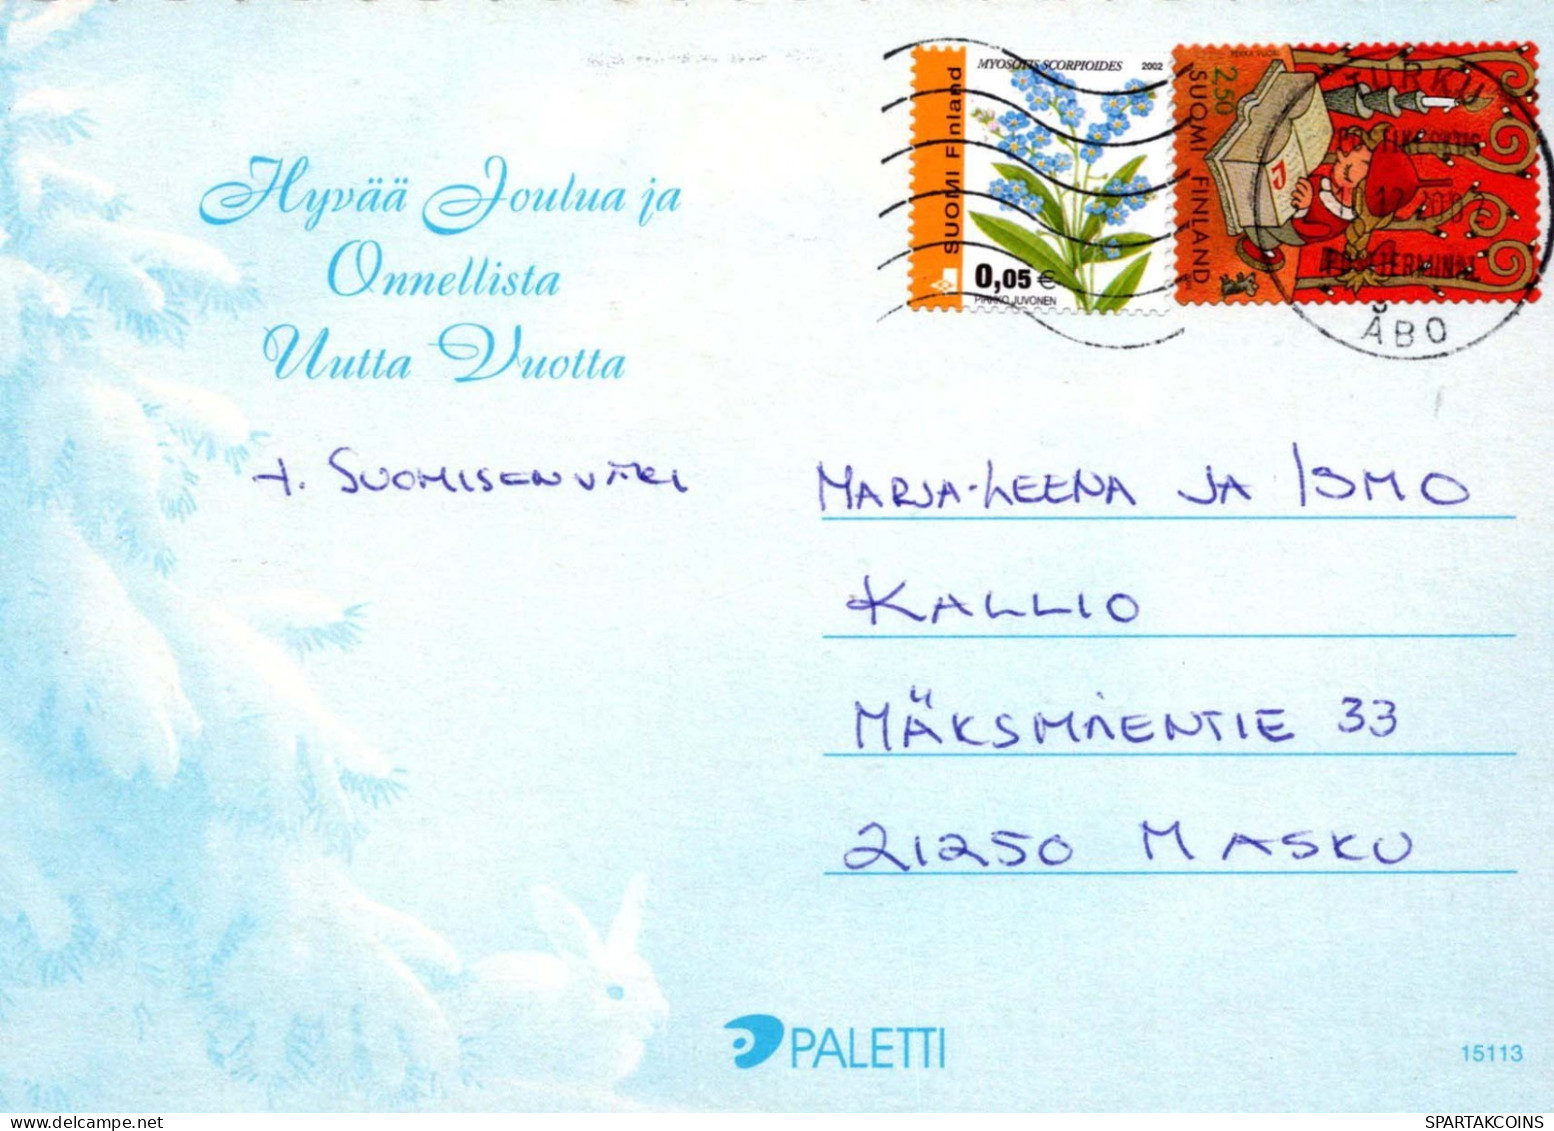 Buon Anno Natale Vintage Cartolina CPSM #PAT145.IT - New Year